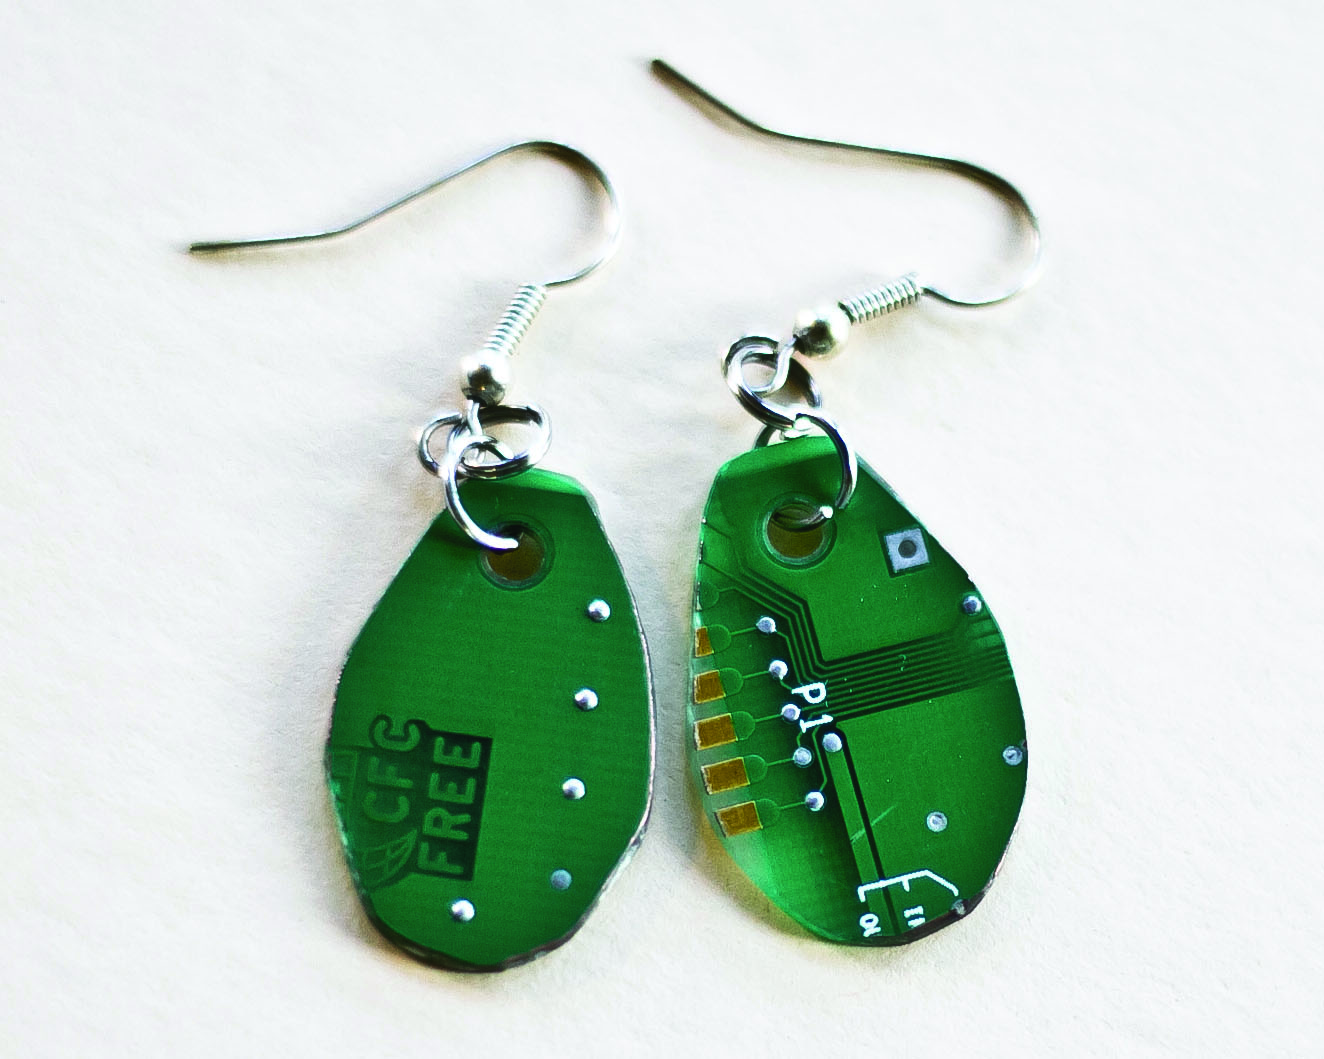 A pair of Ida Short's handmade earrings, made out of recycled PCB board